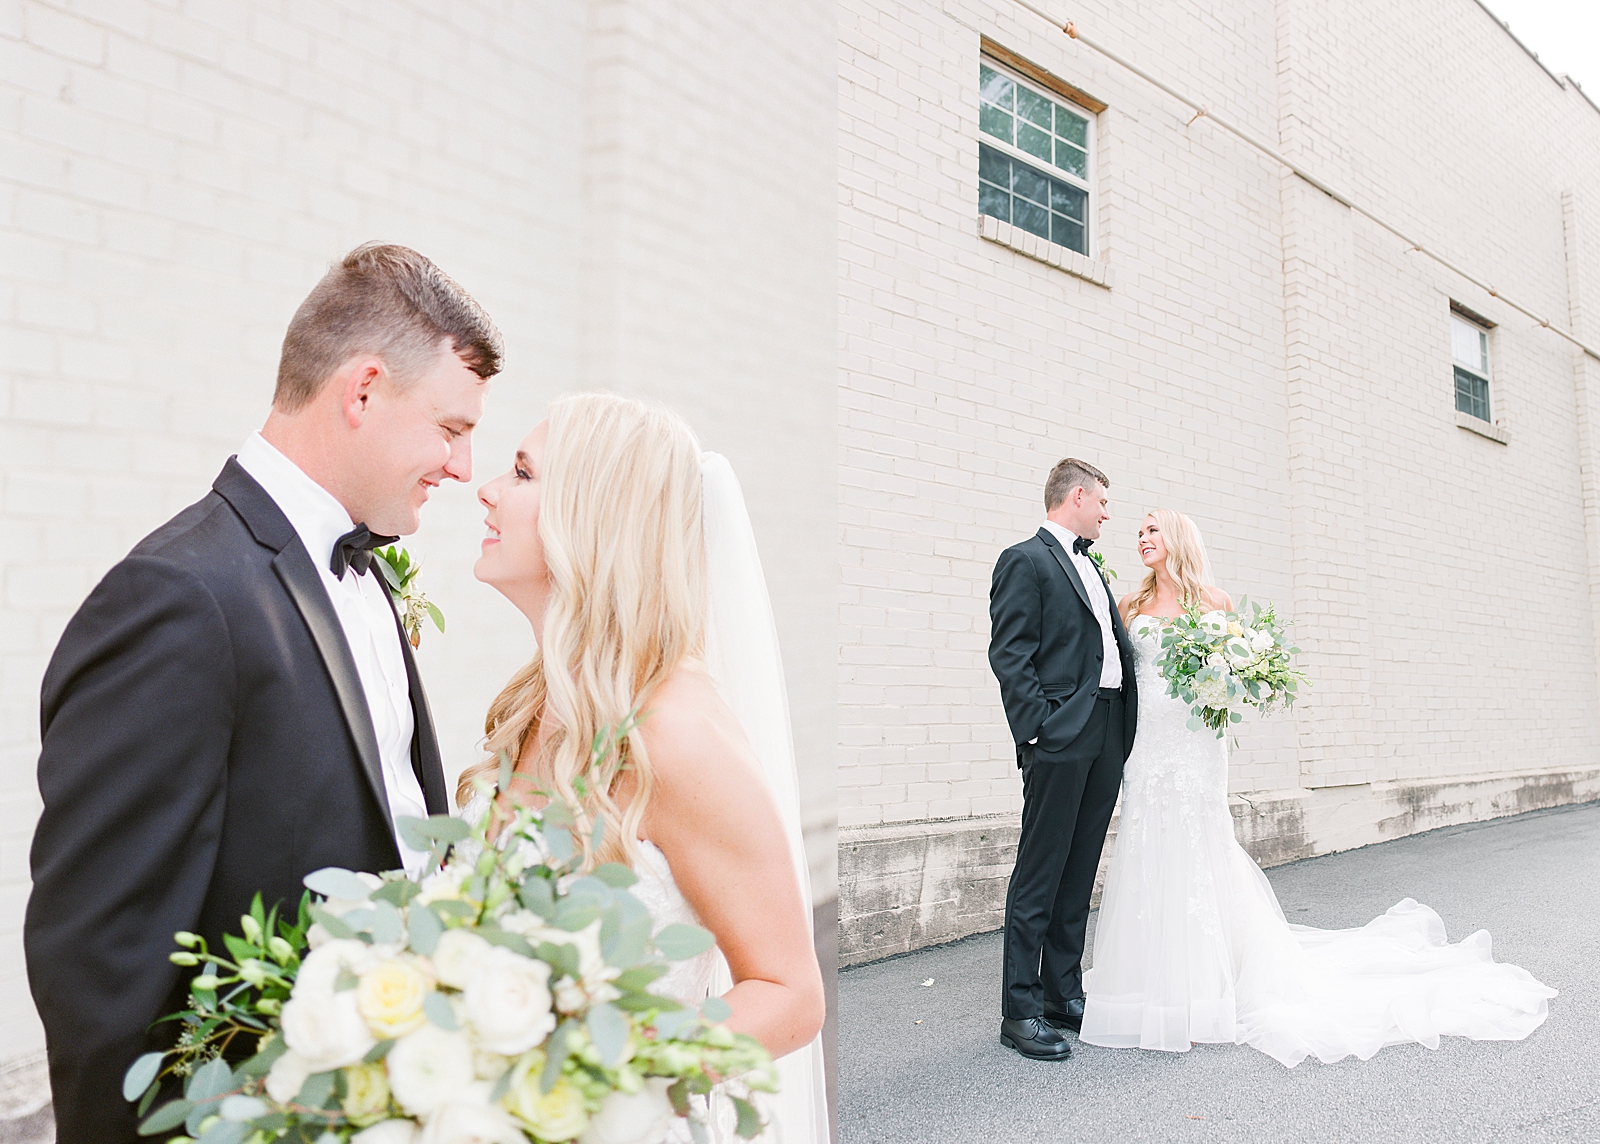 Glover Park Brewery Wedding Bride and Groom Snuggling Photos